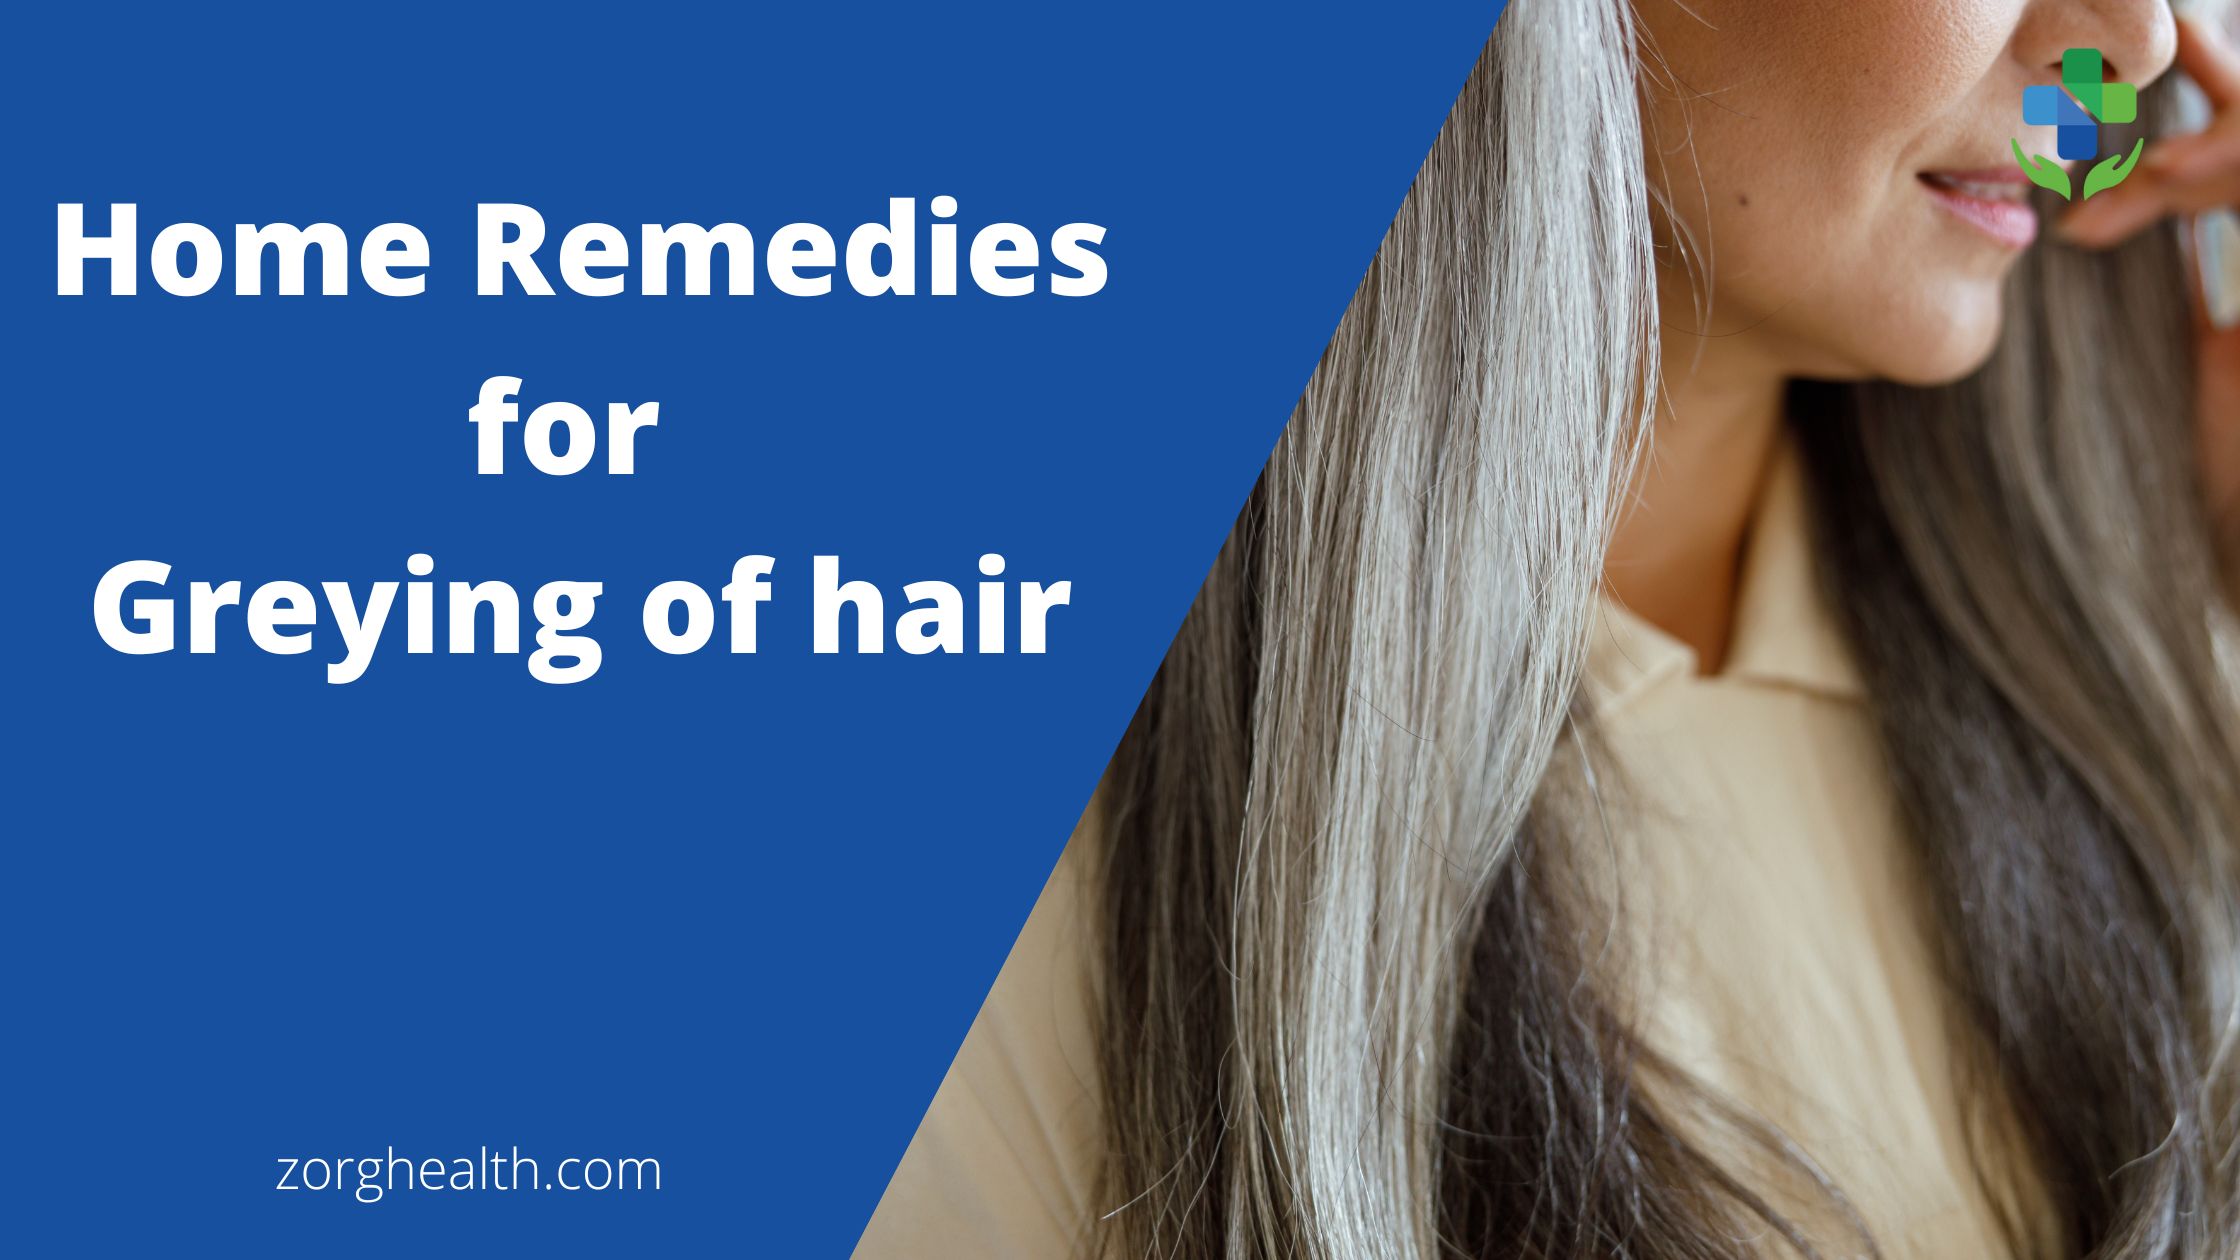 Home Remedies for Greying of hair